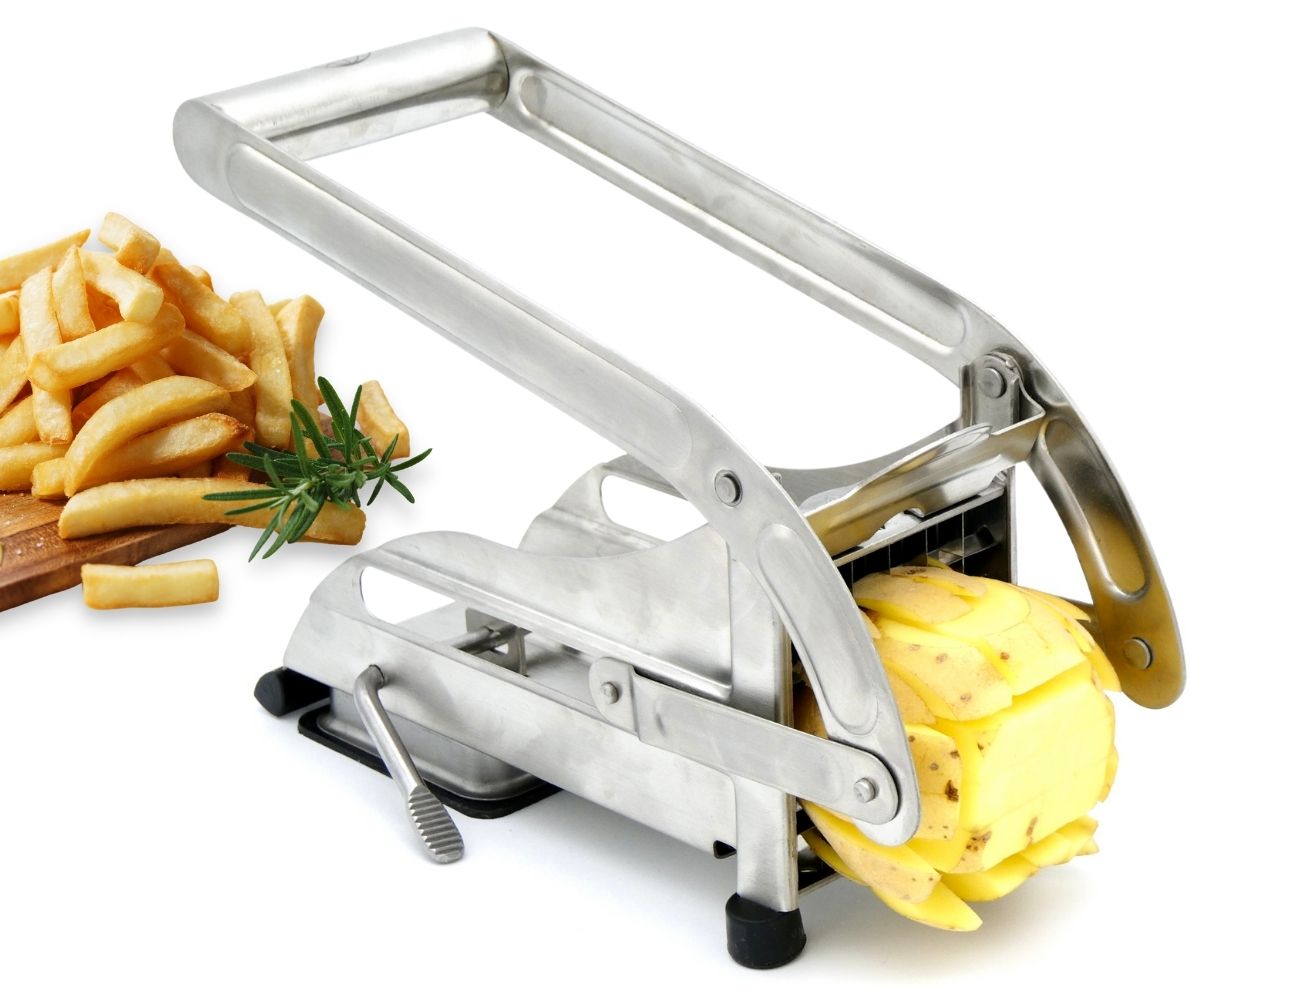 Befano Potato Cutter, Stainless Steel French Fry Slicer with 1/4 Inch and  1/2 Inch Blades for Thin and Thick Fries, Commercial French Fry Cutter for